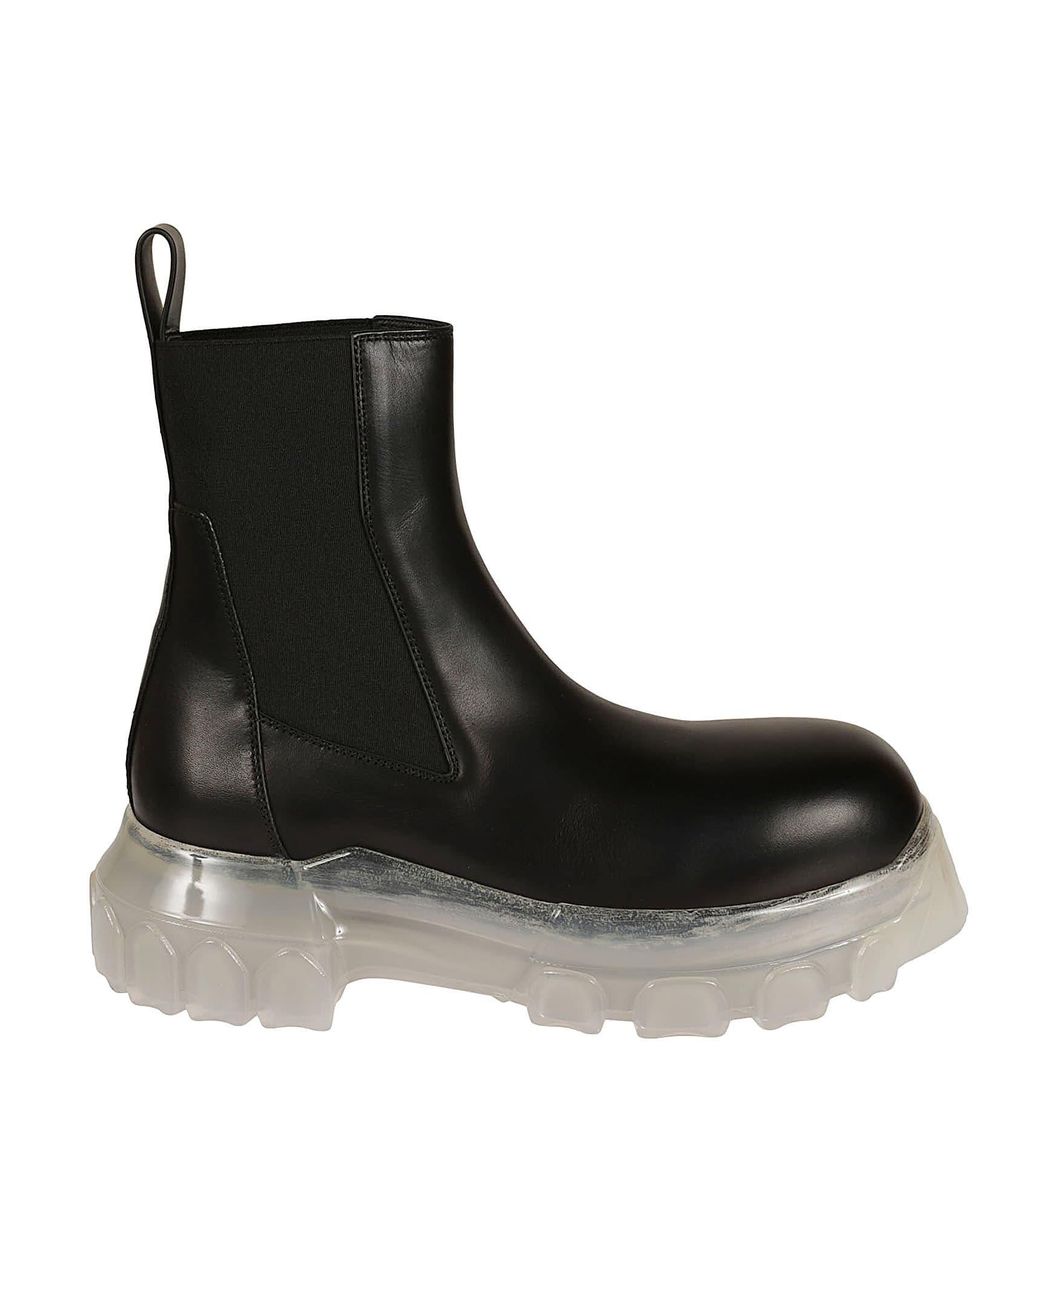 Rick Owens Beatle Bozo Tractor Boots in Black | Lyst